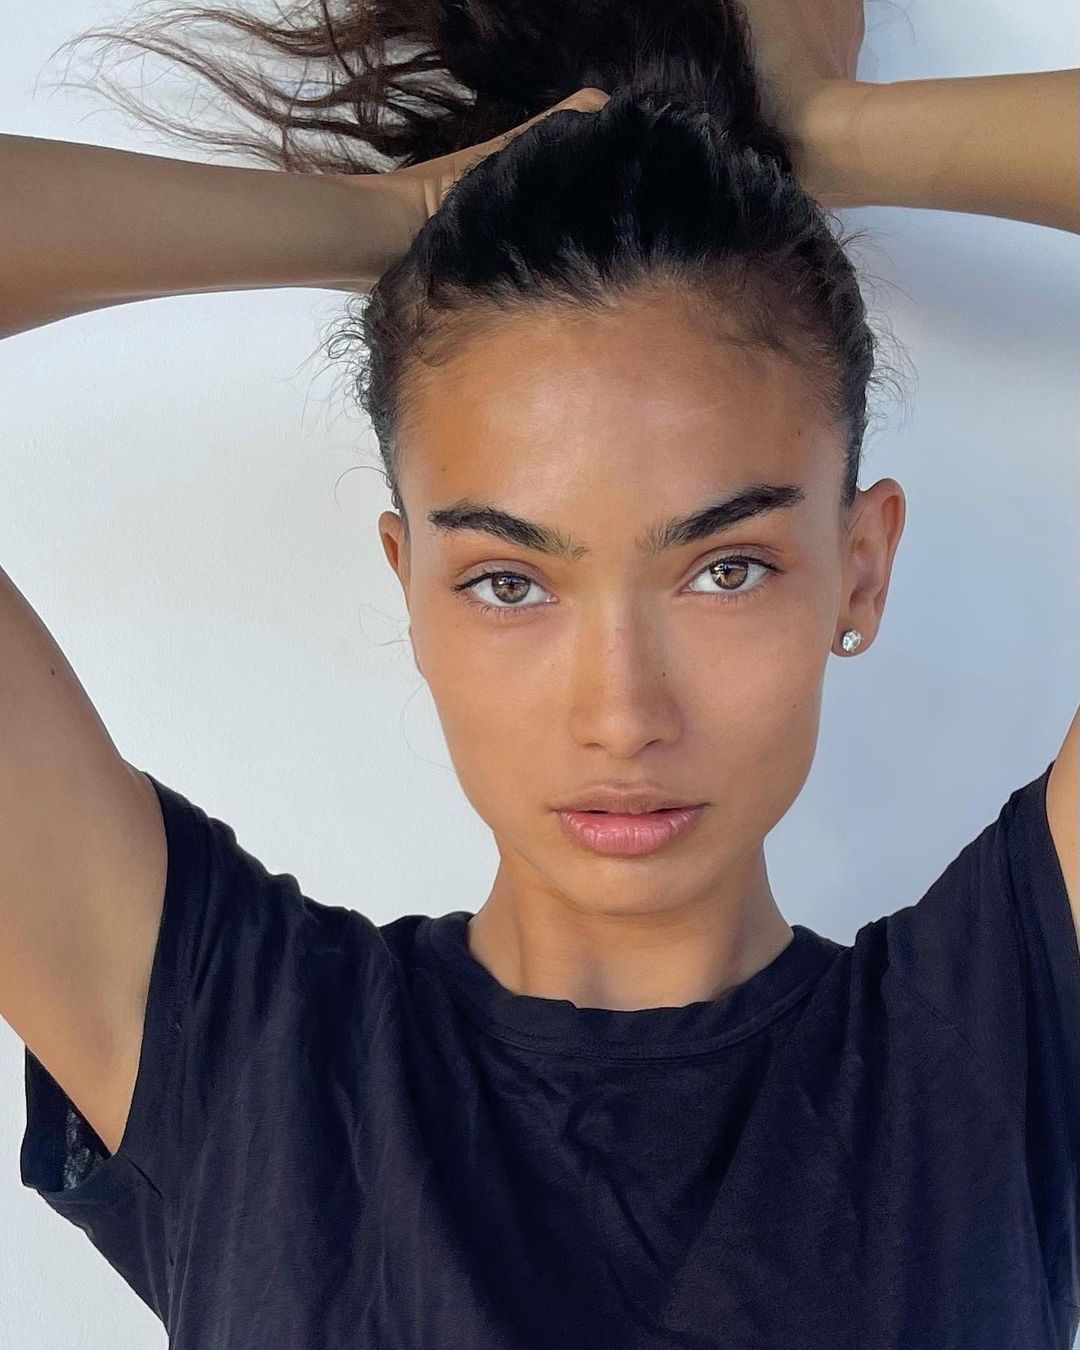 Kelly gale 26 hottest pics, kelly gale 26 instagram